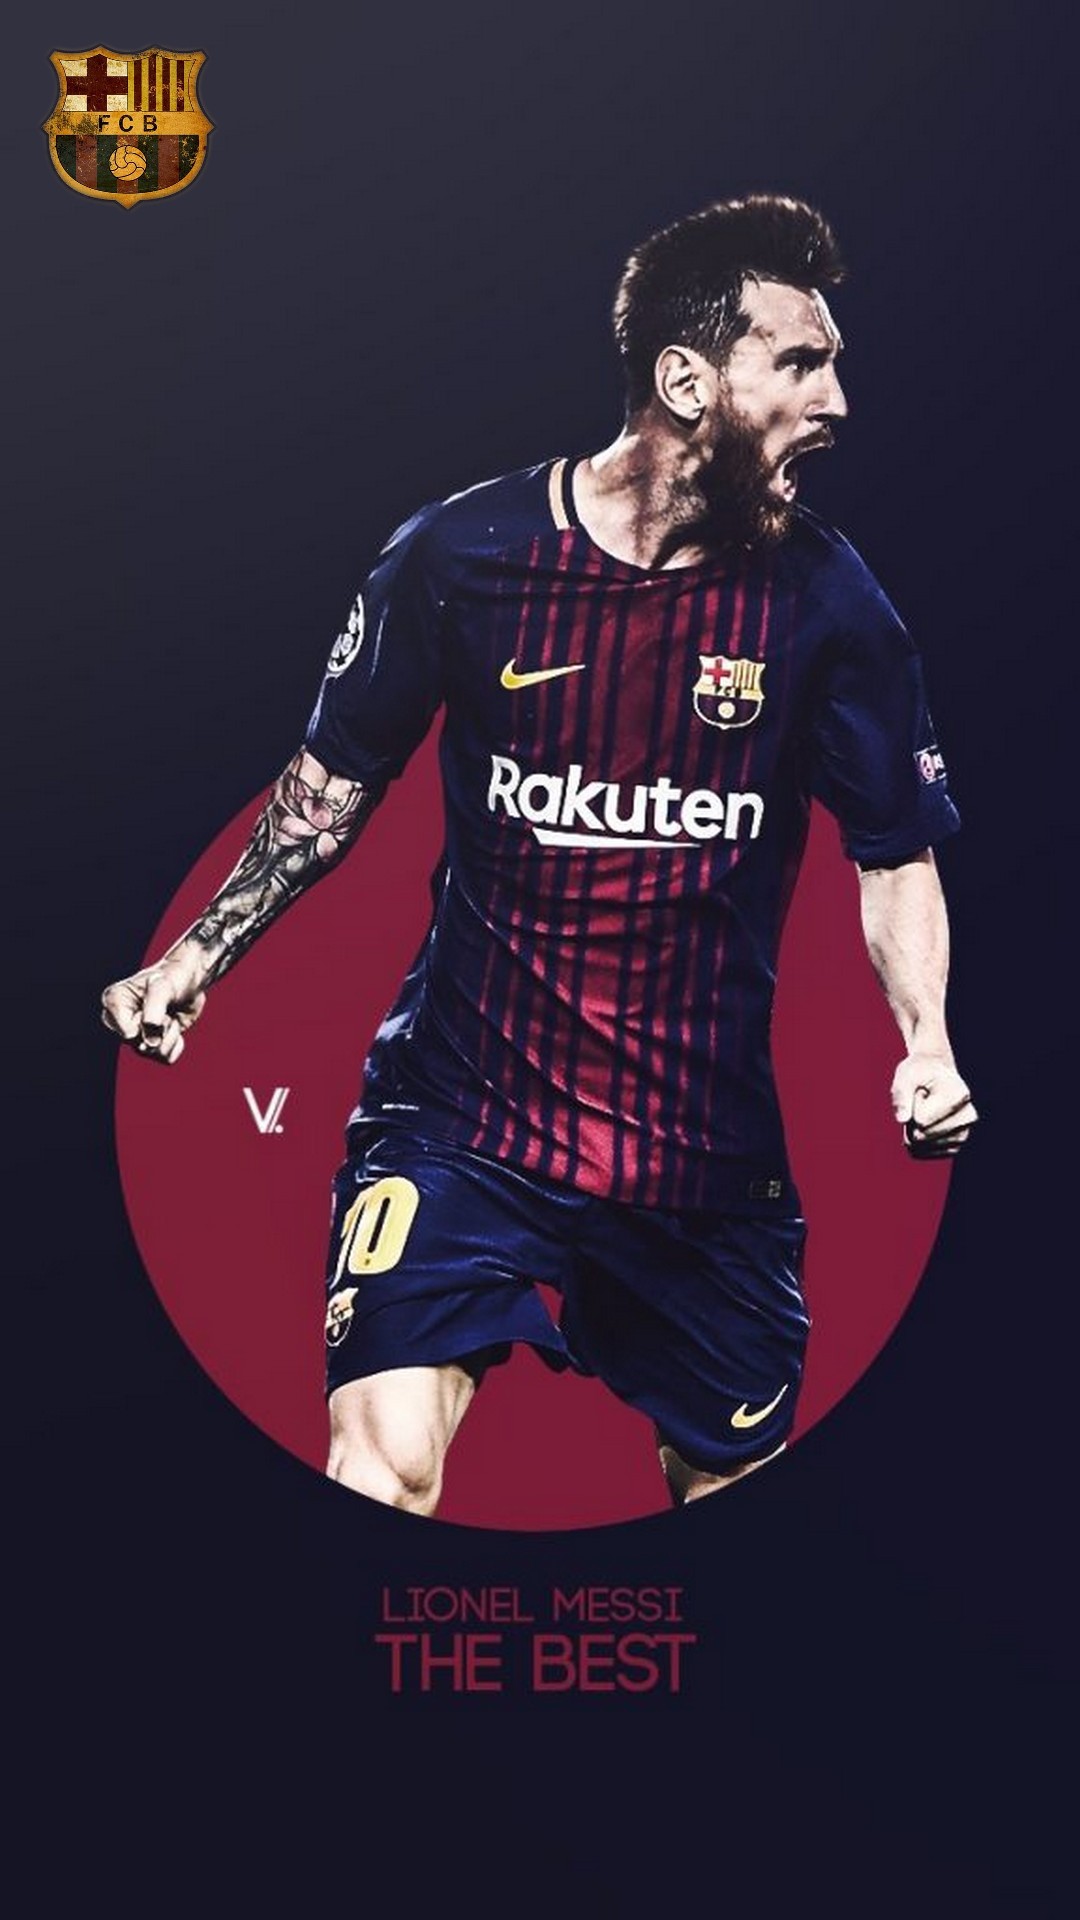 Wallpaper Lionel Messi Barcelona iPhone With Resolution 1080X1920 pixel. You can make this wallpaper for your Mac or Windows Desktop Background, iPhone, Android or Tablet and another Smartphone device for free